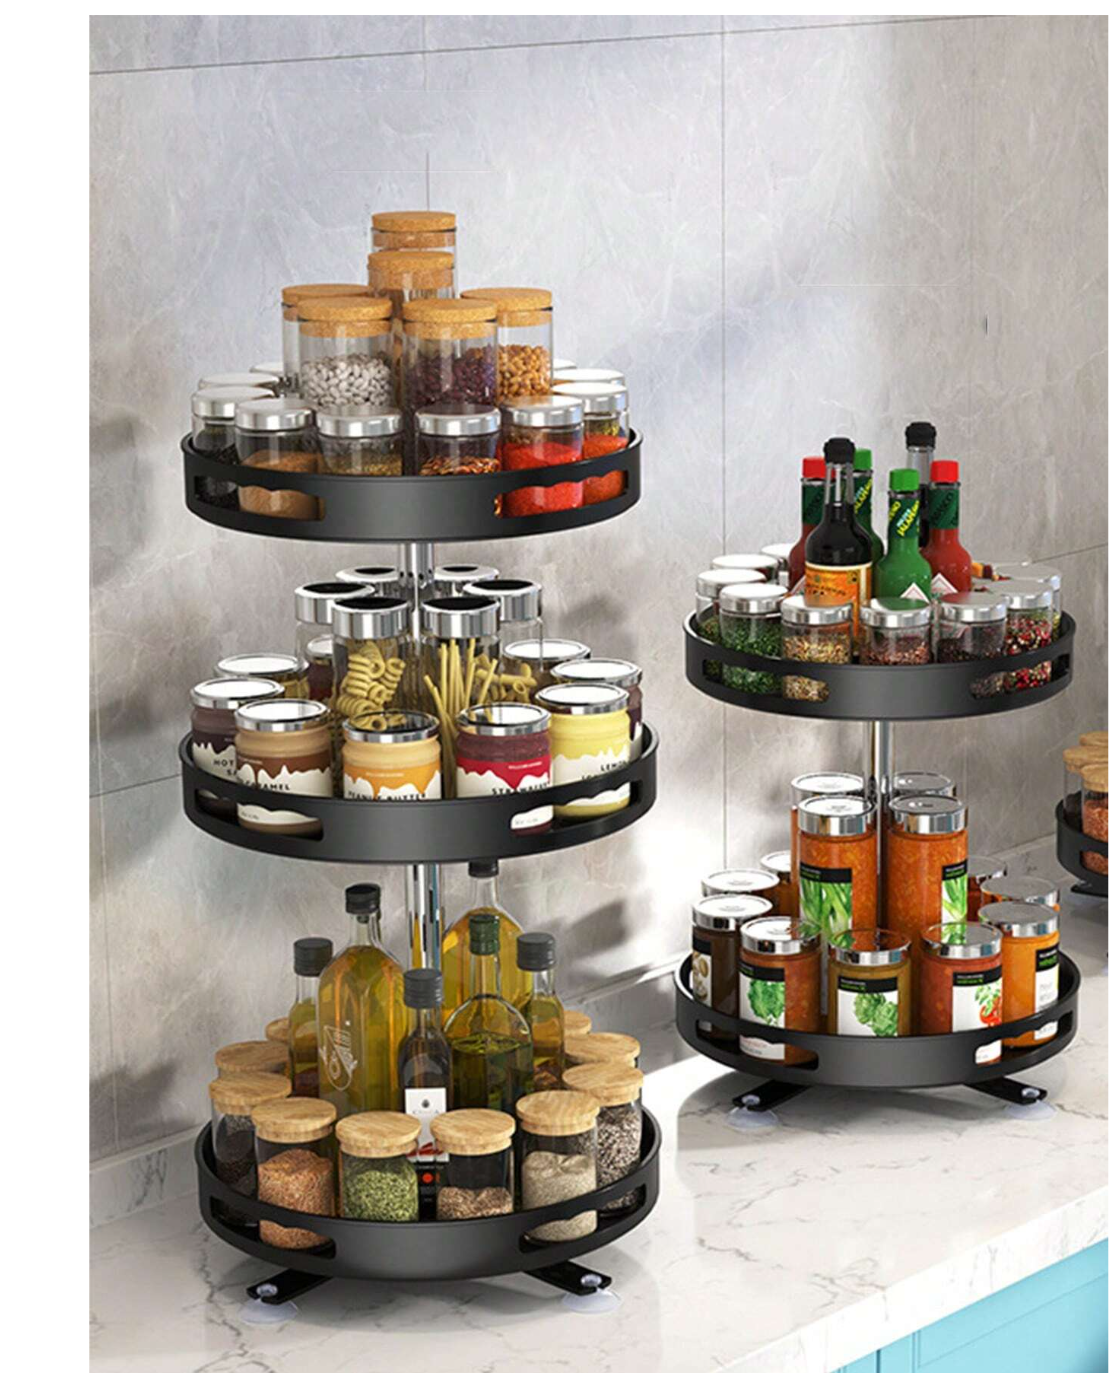 Kitchen Harmony: Double-Layer Rotating Shelf for Multi-Functional Condiment and Storage Bliss!